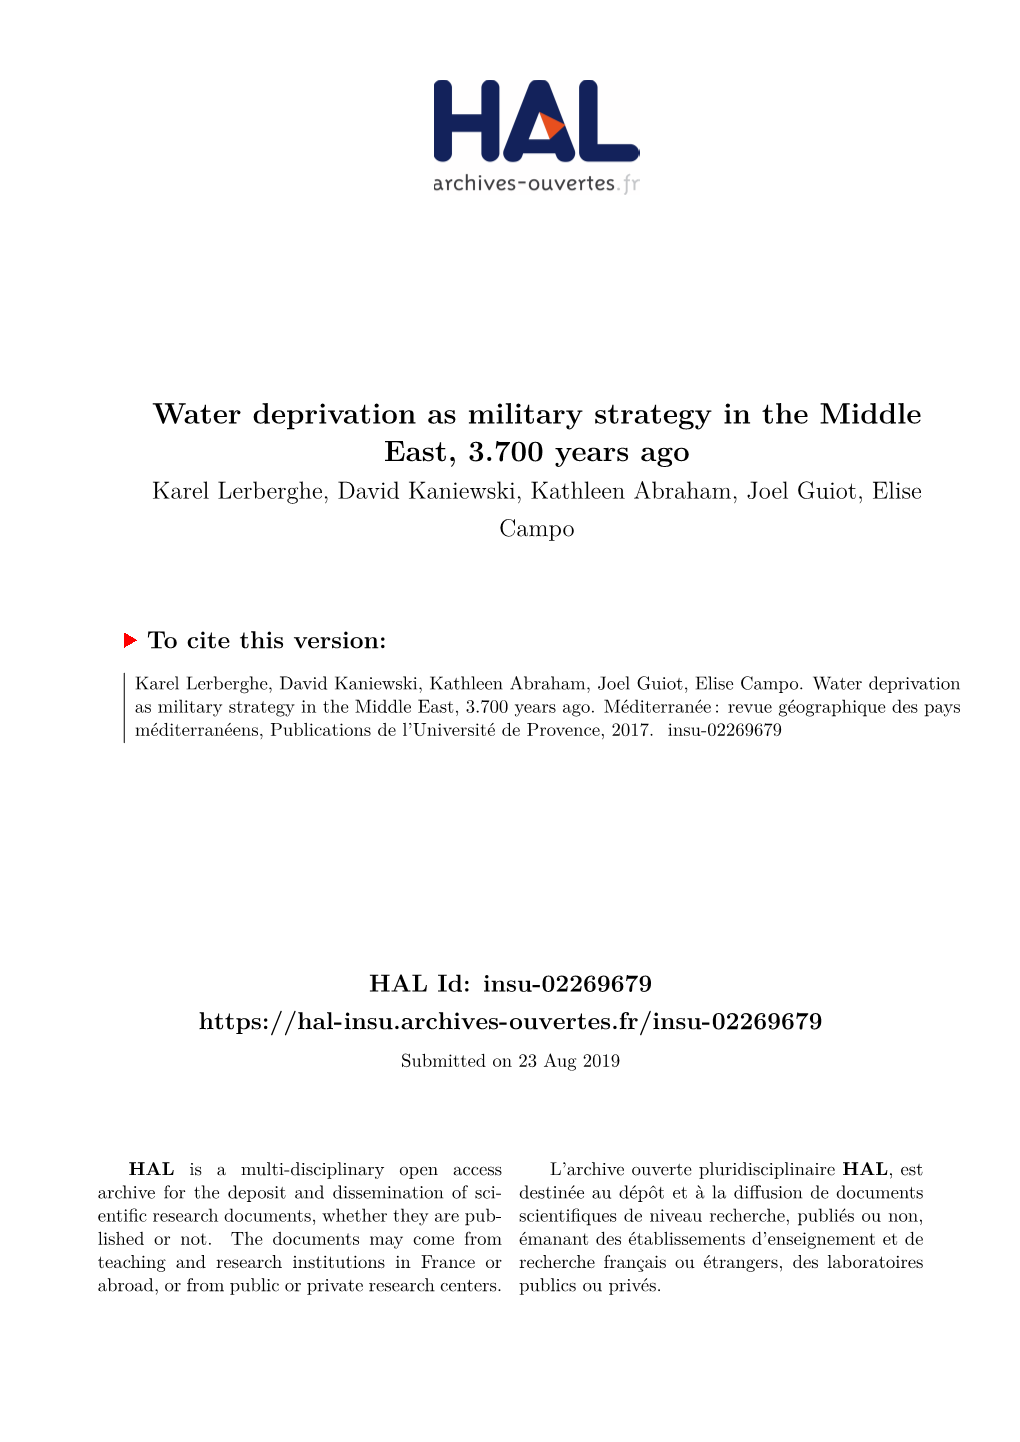 Water Deprivation As Military Strategy in the Middle East, 3.700 Years Ago Karel Lerberghe, David Kaniewski, Kathleen Abraham, Joel Guiot, Elise Campo